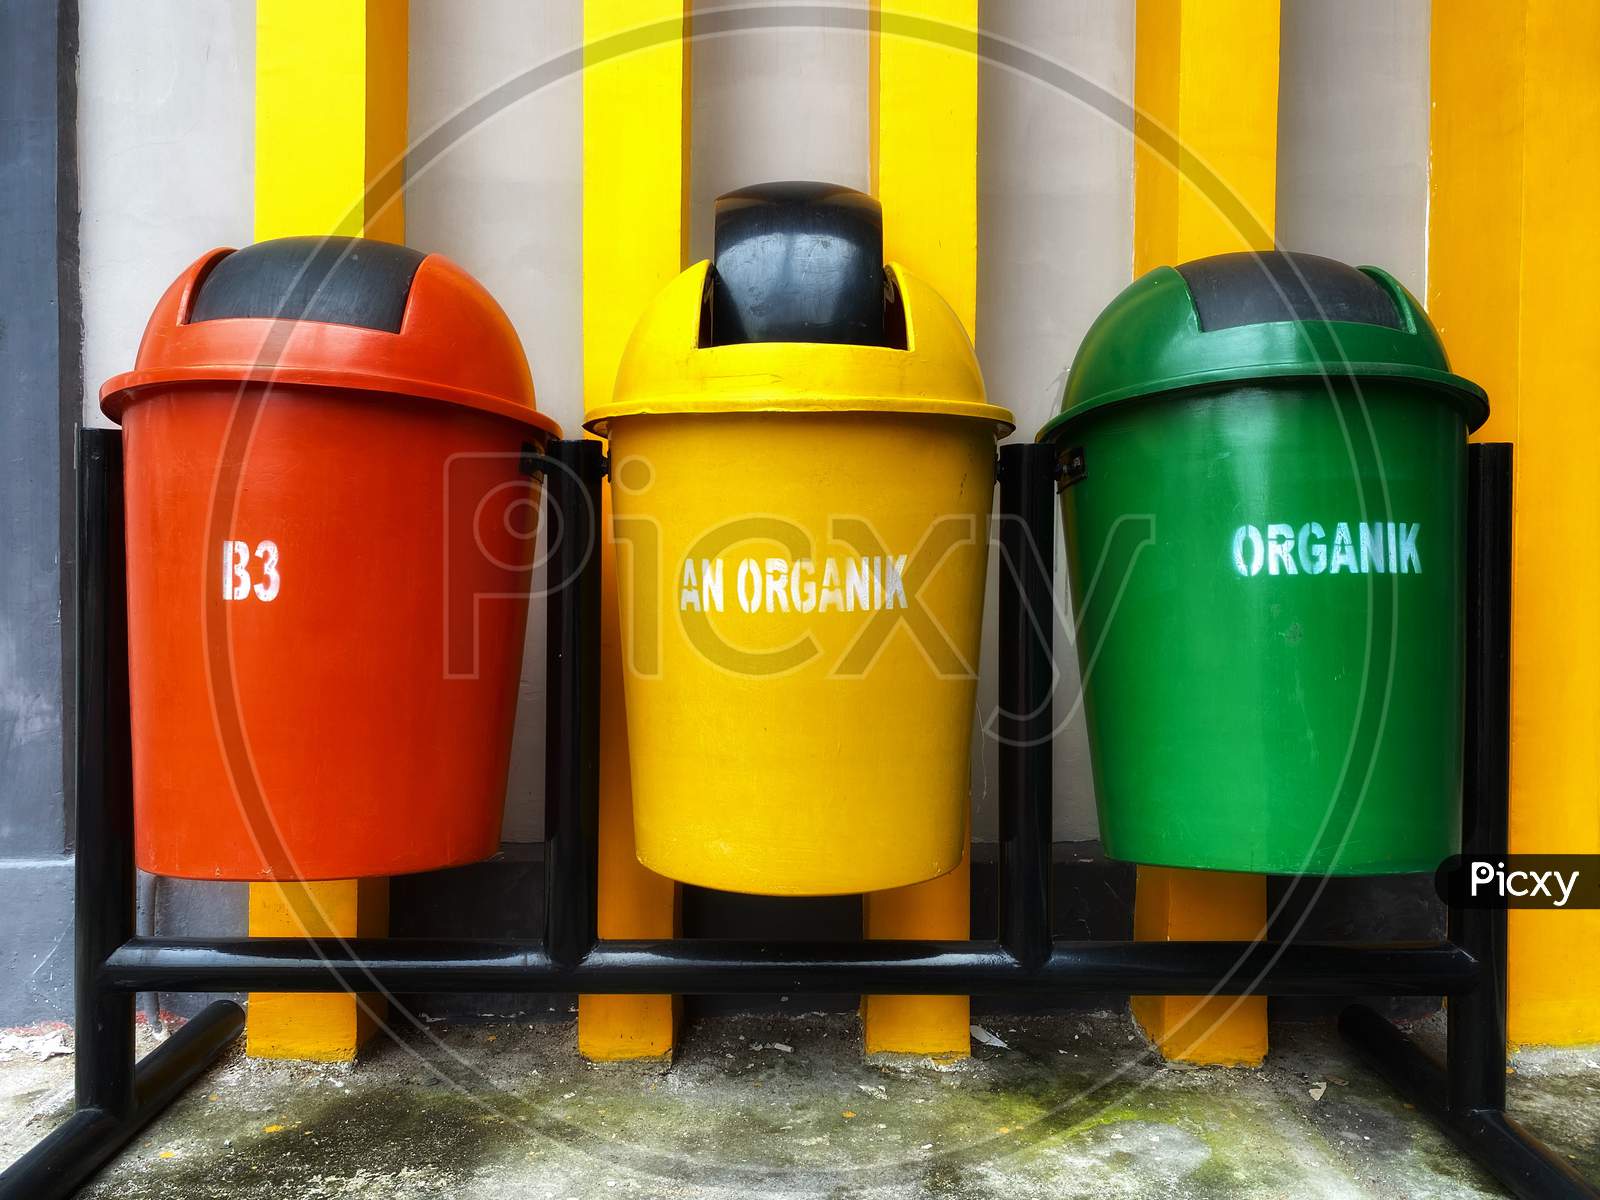 Situation in the Office that providing 3 colour bins. Red for "B3-Bahan Berbahaya dan Beracun" (in Bahasa Indonesia) or Toxic Waste. Yellow for Organic Waste. Green for Organic Waste.